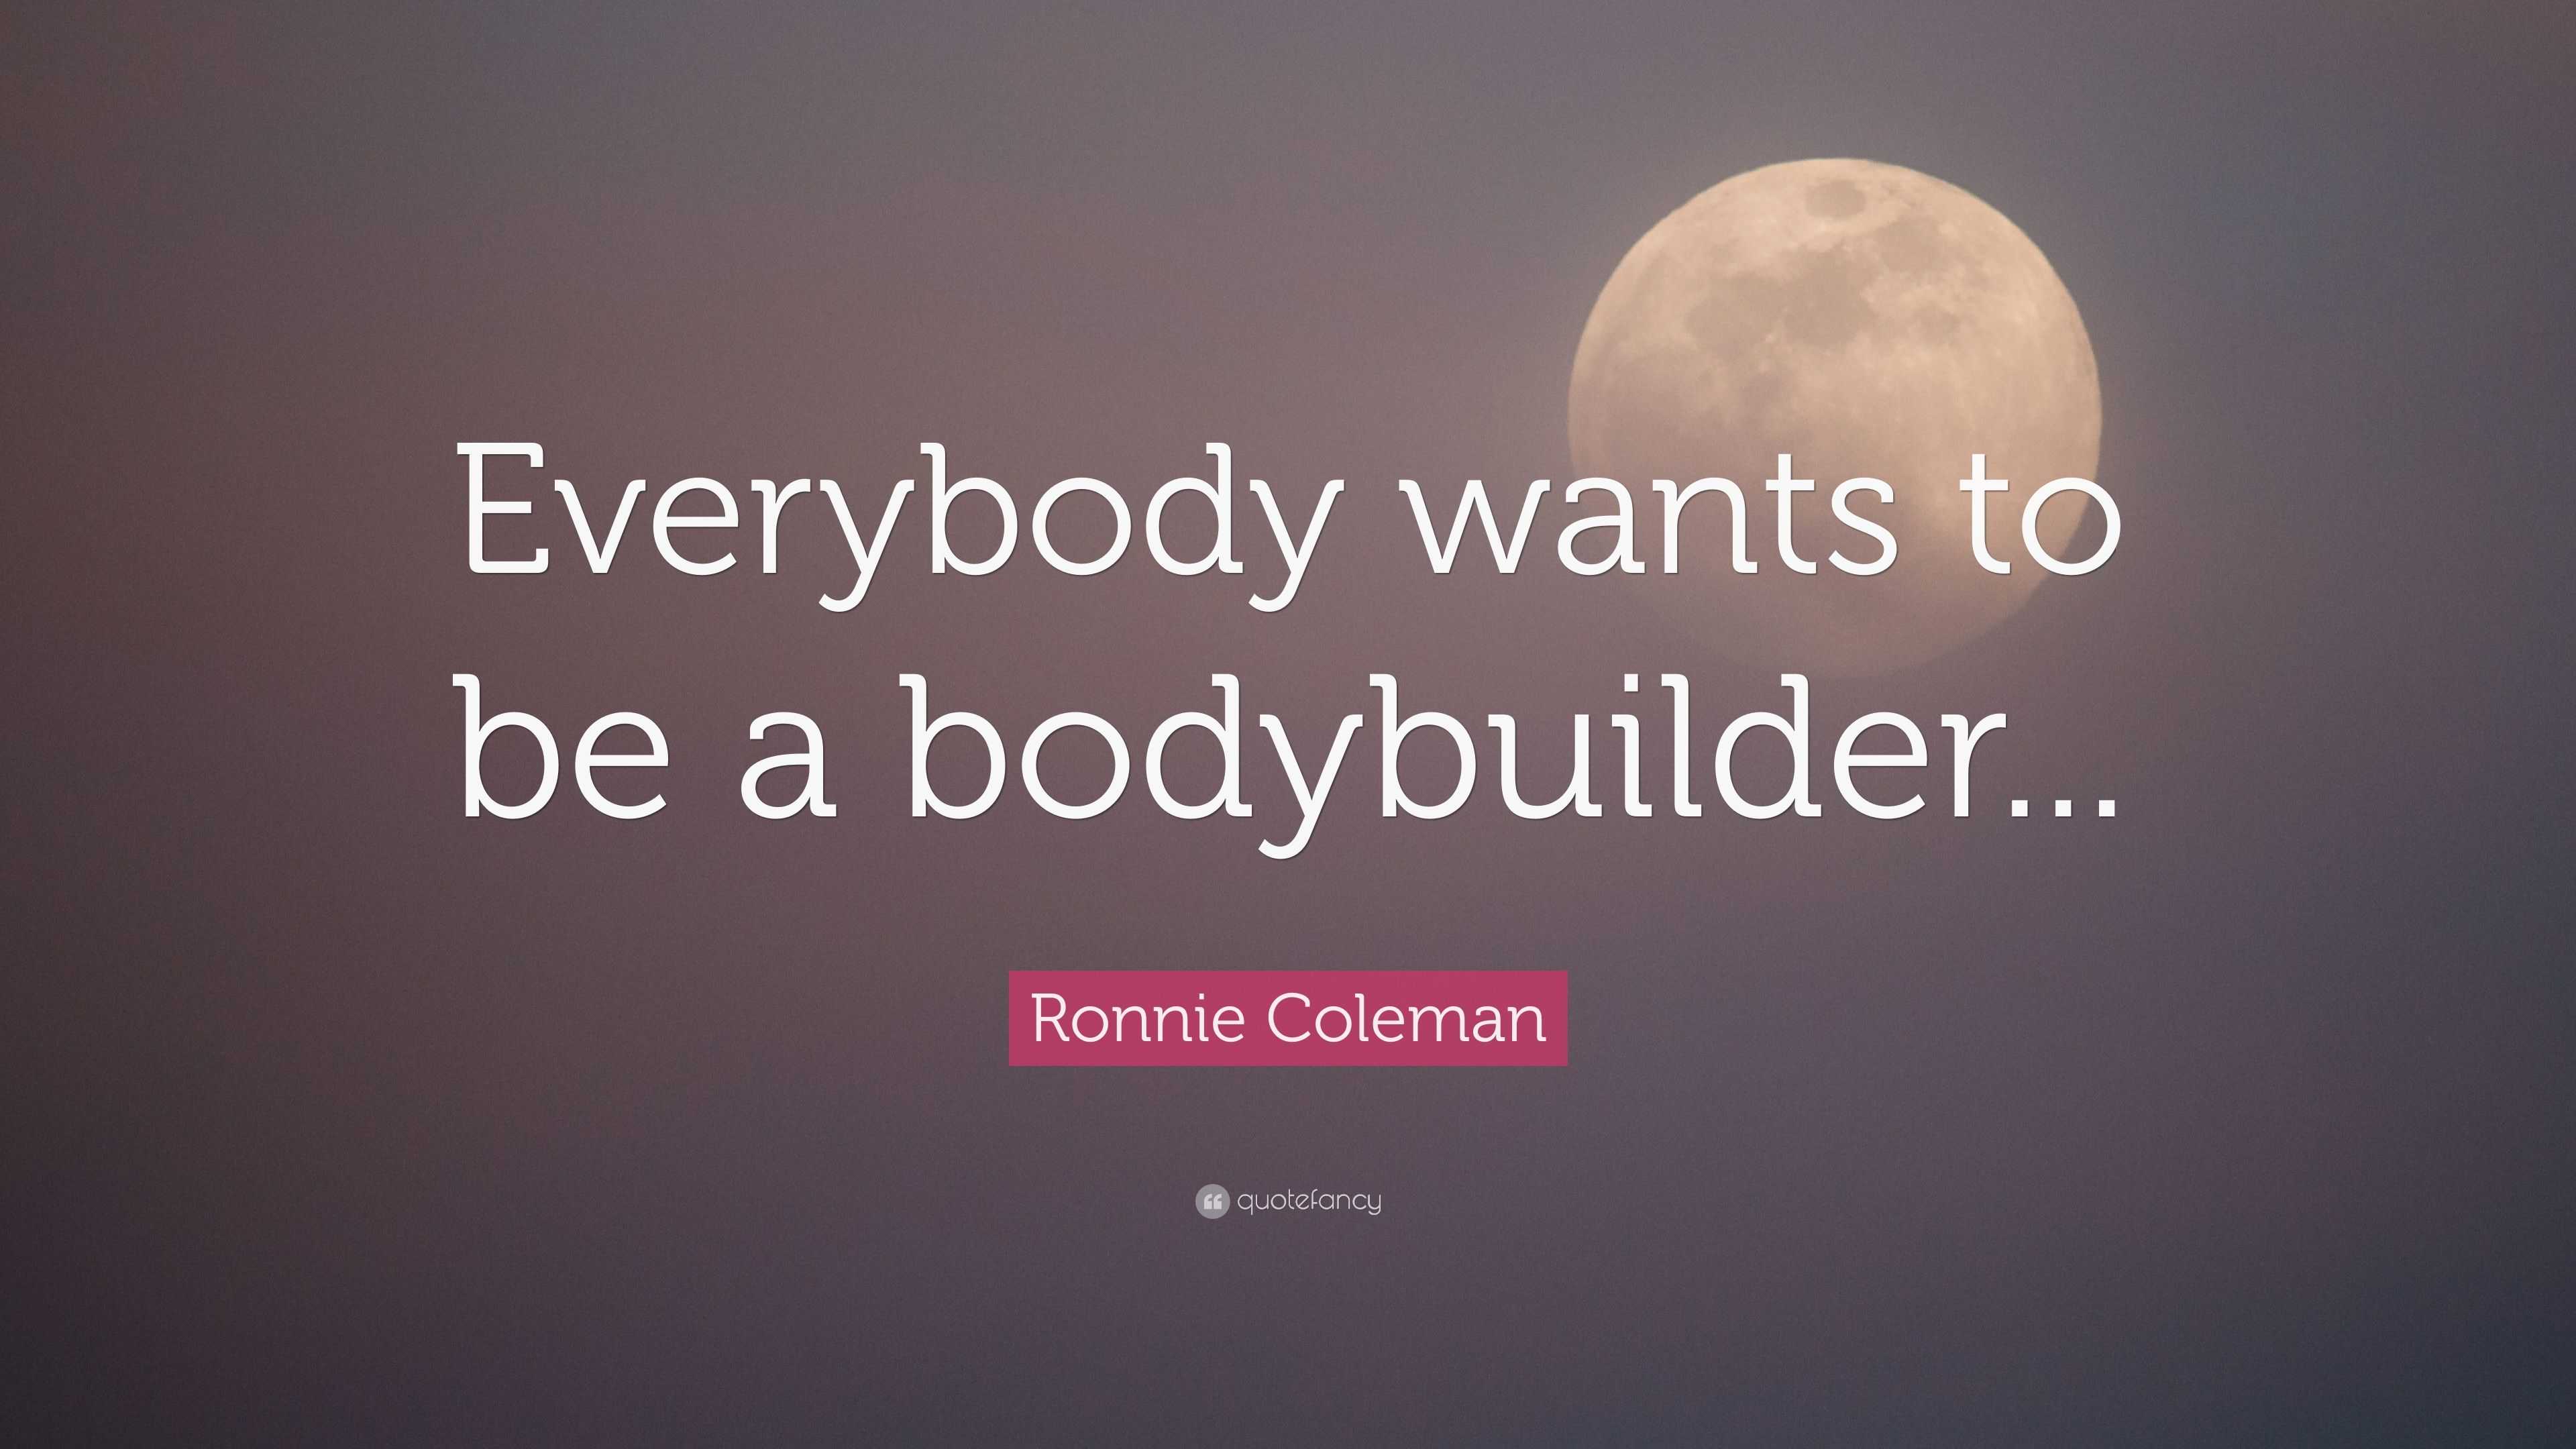 Ronnie Coleman Quote: "Everybody wants to be a bodybuilder..." (9 wallpapers) - Quotefancy